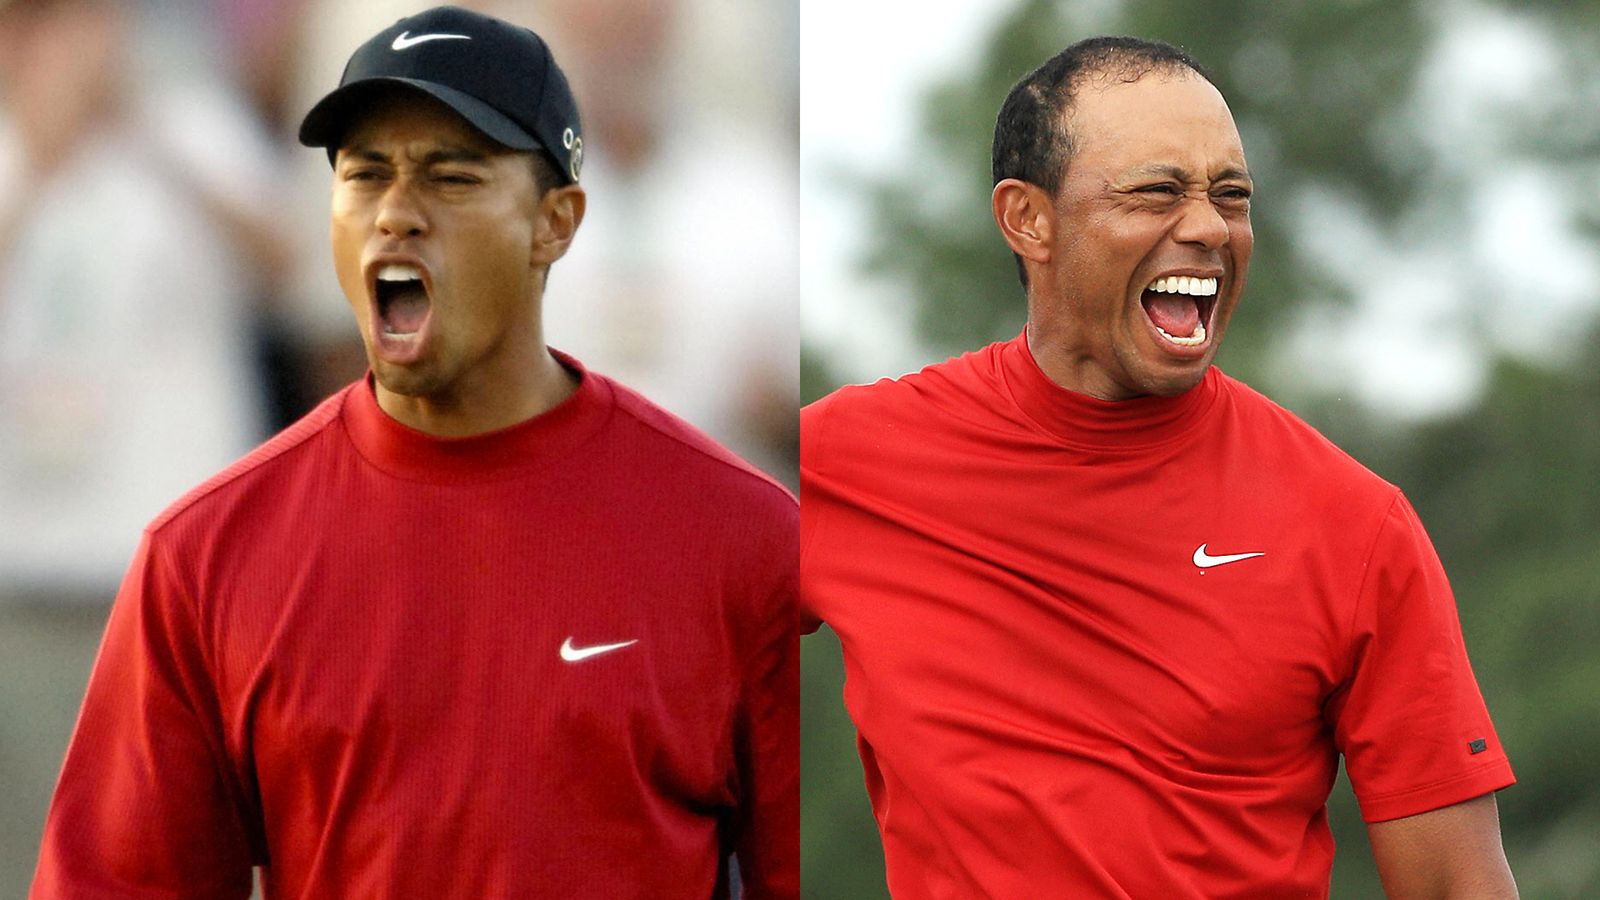 Tiger Woods' wins: Watch how he celebrated all his 81 PGA Tour titles ...